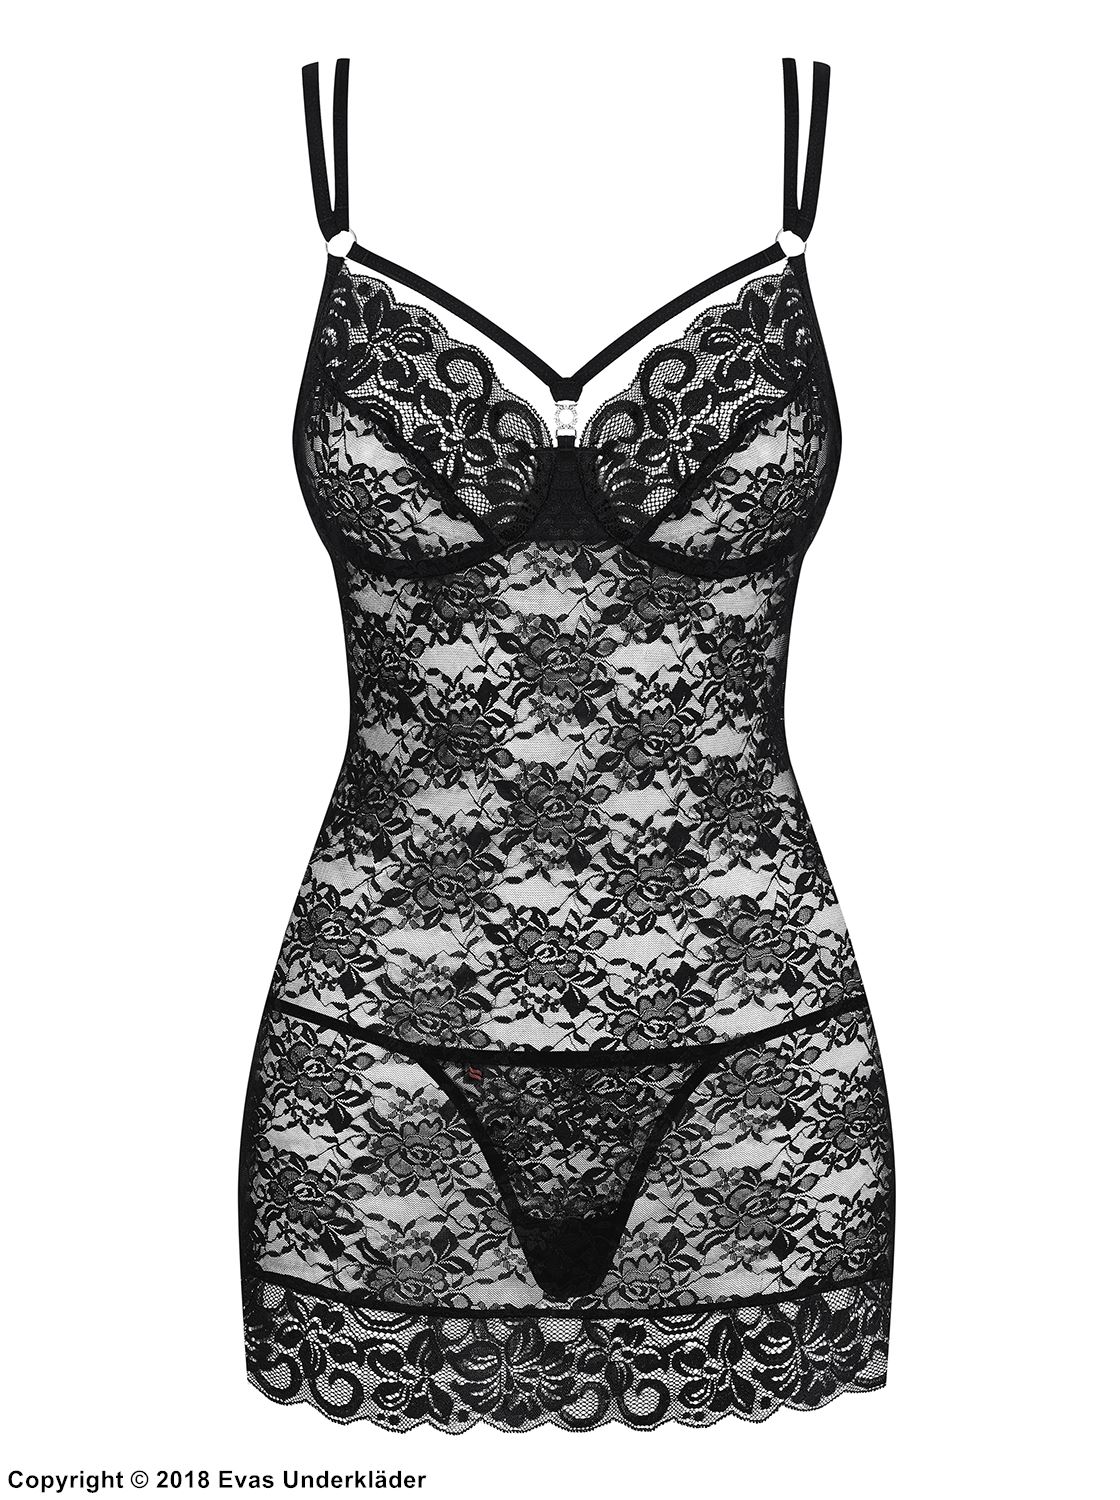 Skin-tight chemise, rhinestones, straps over bust, floral lace